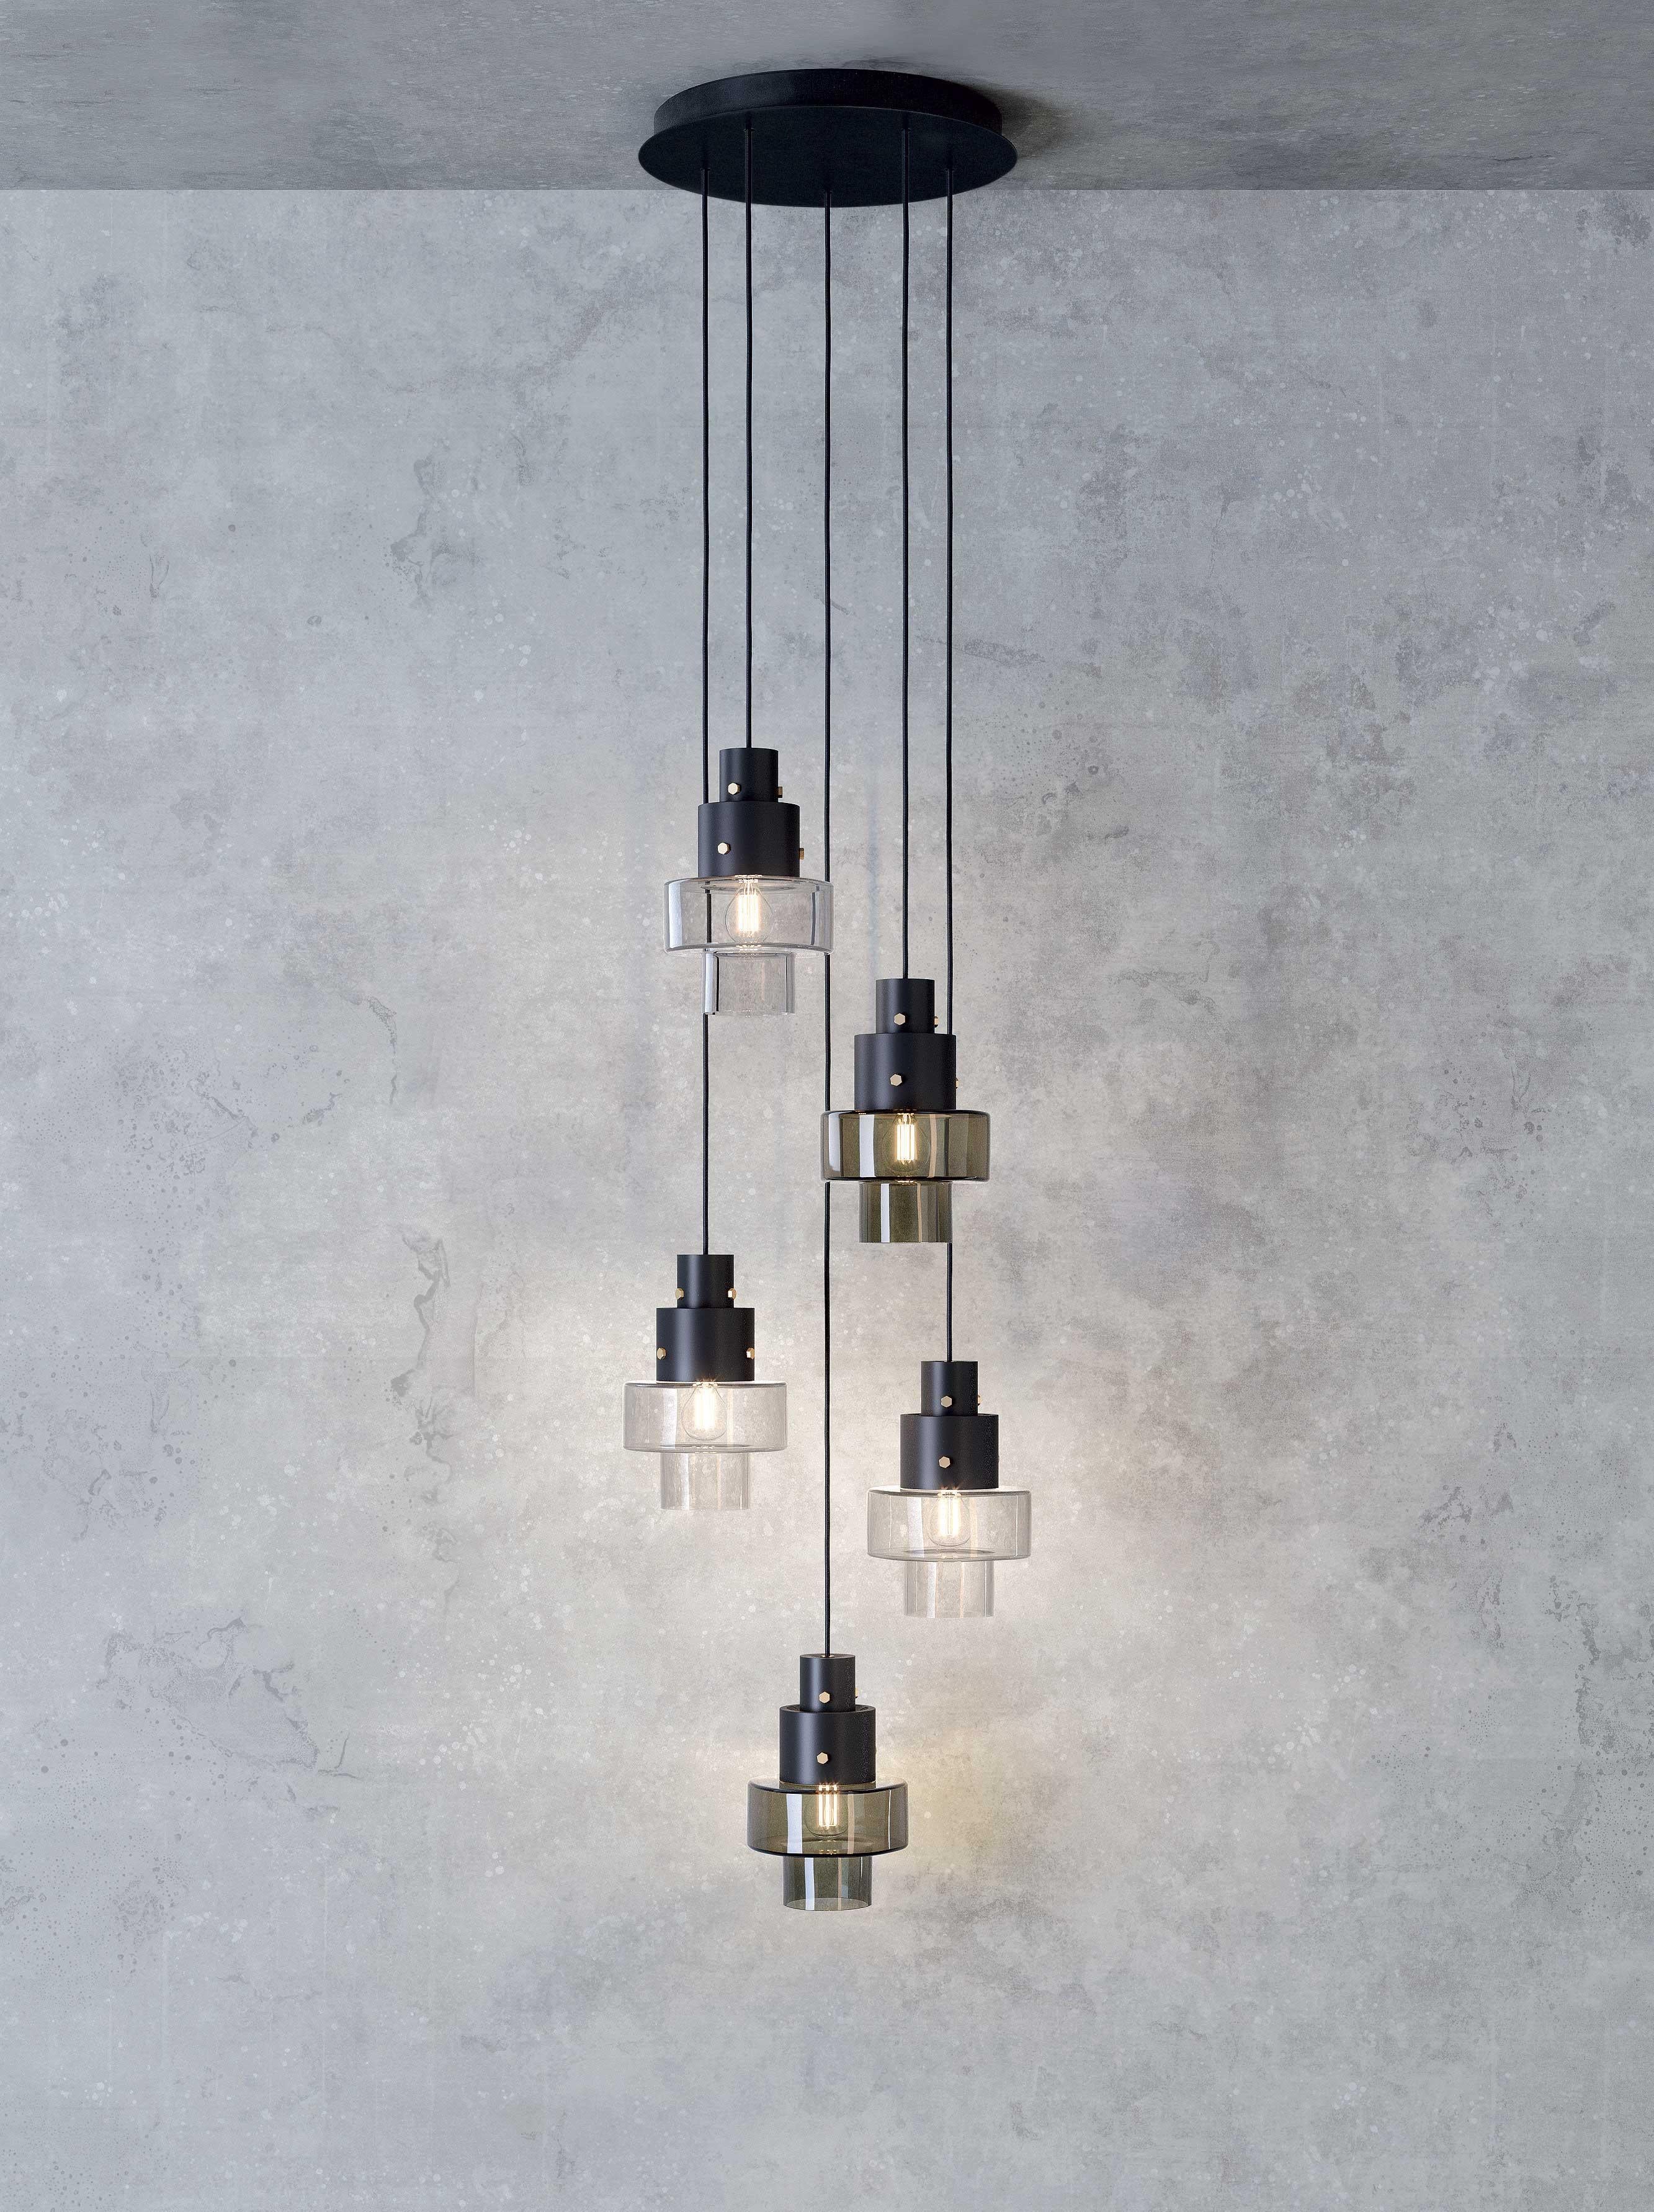 Gask is a small suspension lamp with a big presence. It looks like it came out of a 1920s emporium or a warehouse for work tools, but also recalls ziggurats, the sacred terraced pyramids of ancient Mesopotamia.

Gask is a perfect mix of materials